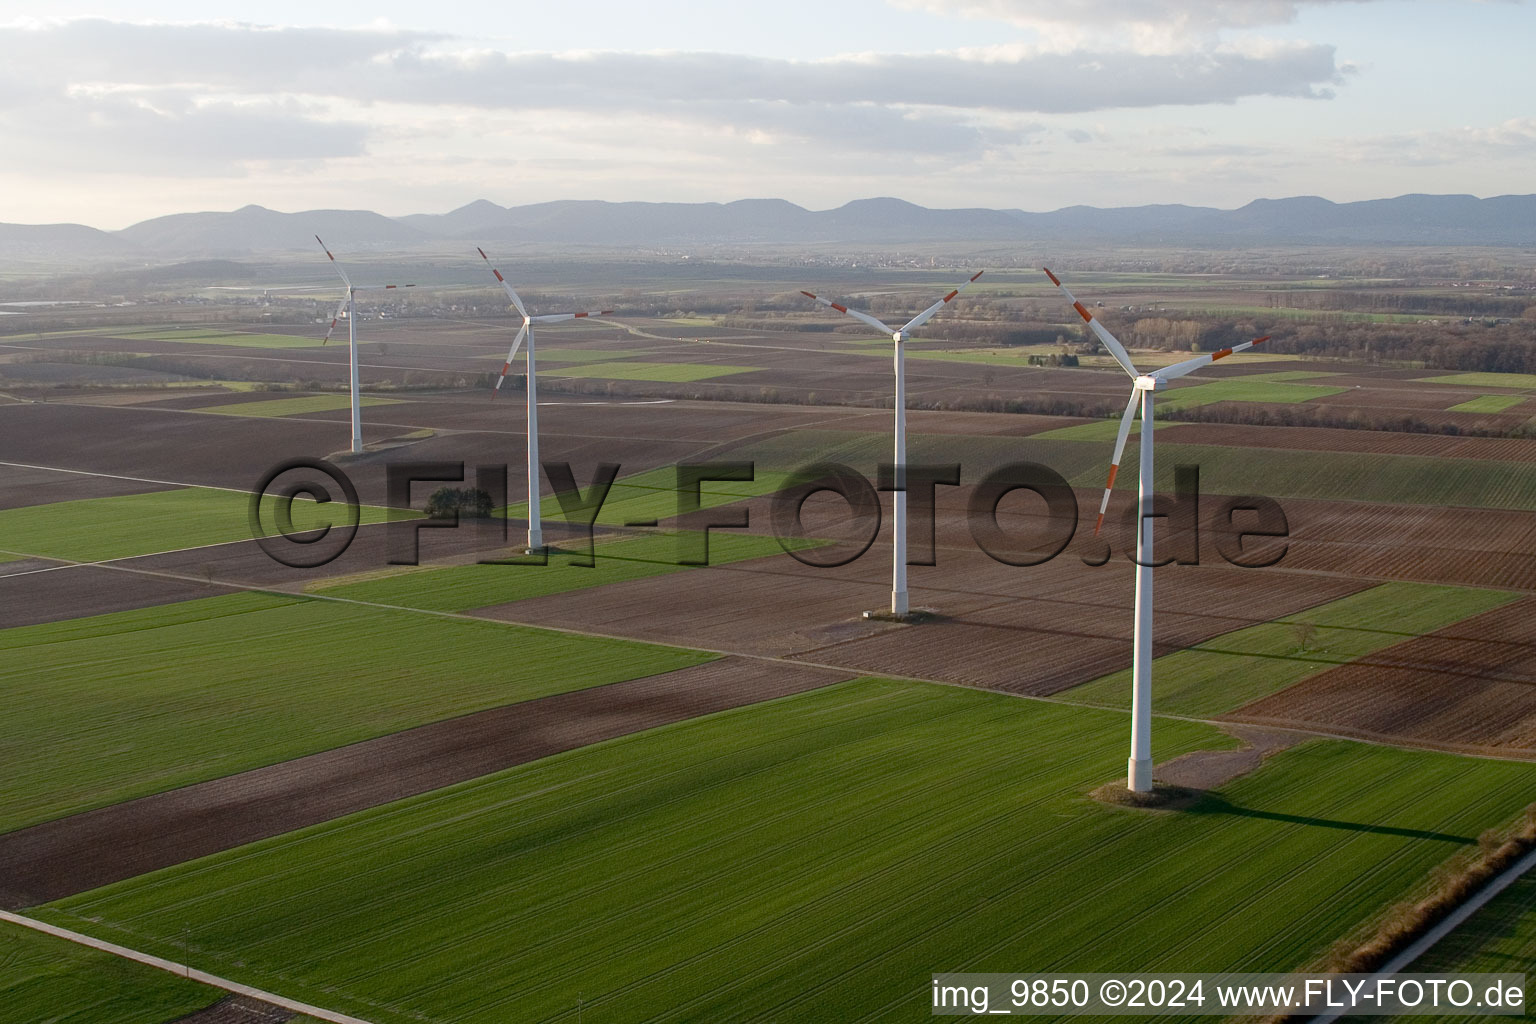 Aerial view of Wind turbine windmills on a field in Minfeld in the state Rhineland-Palatinate